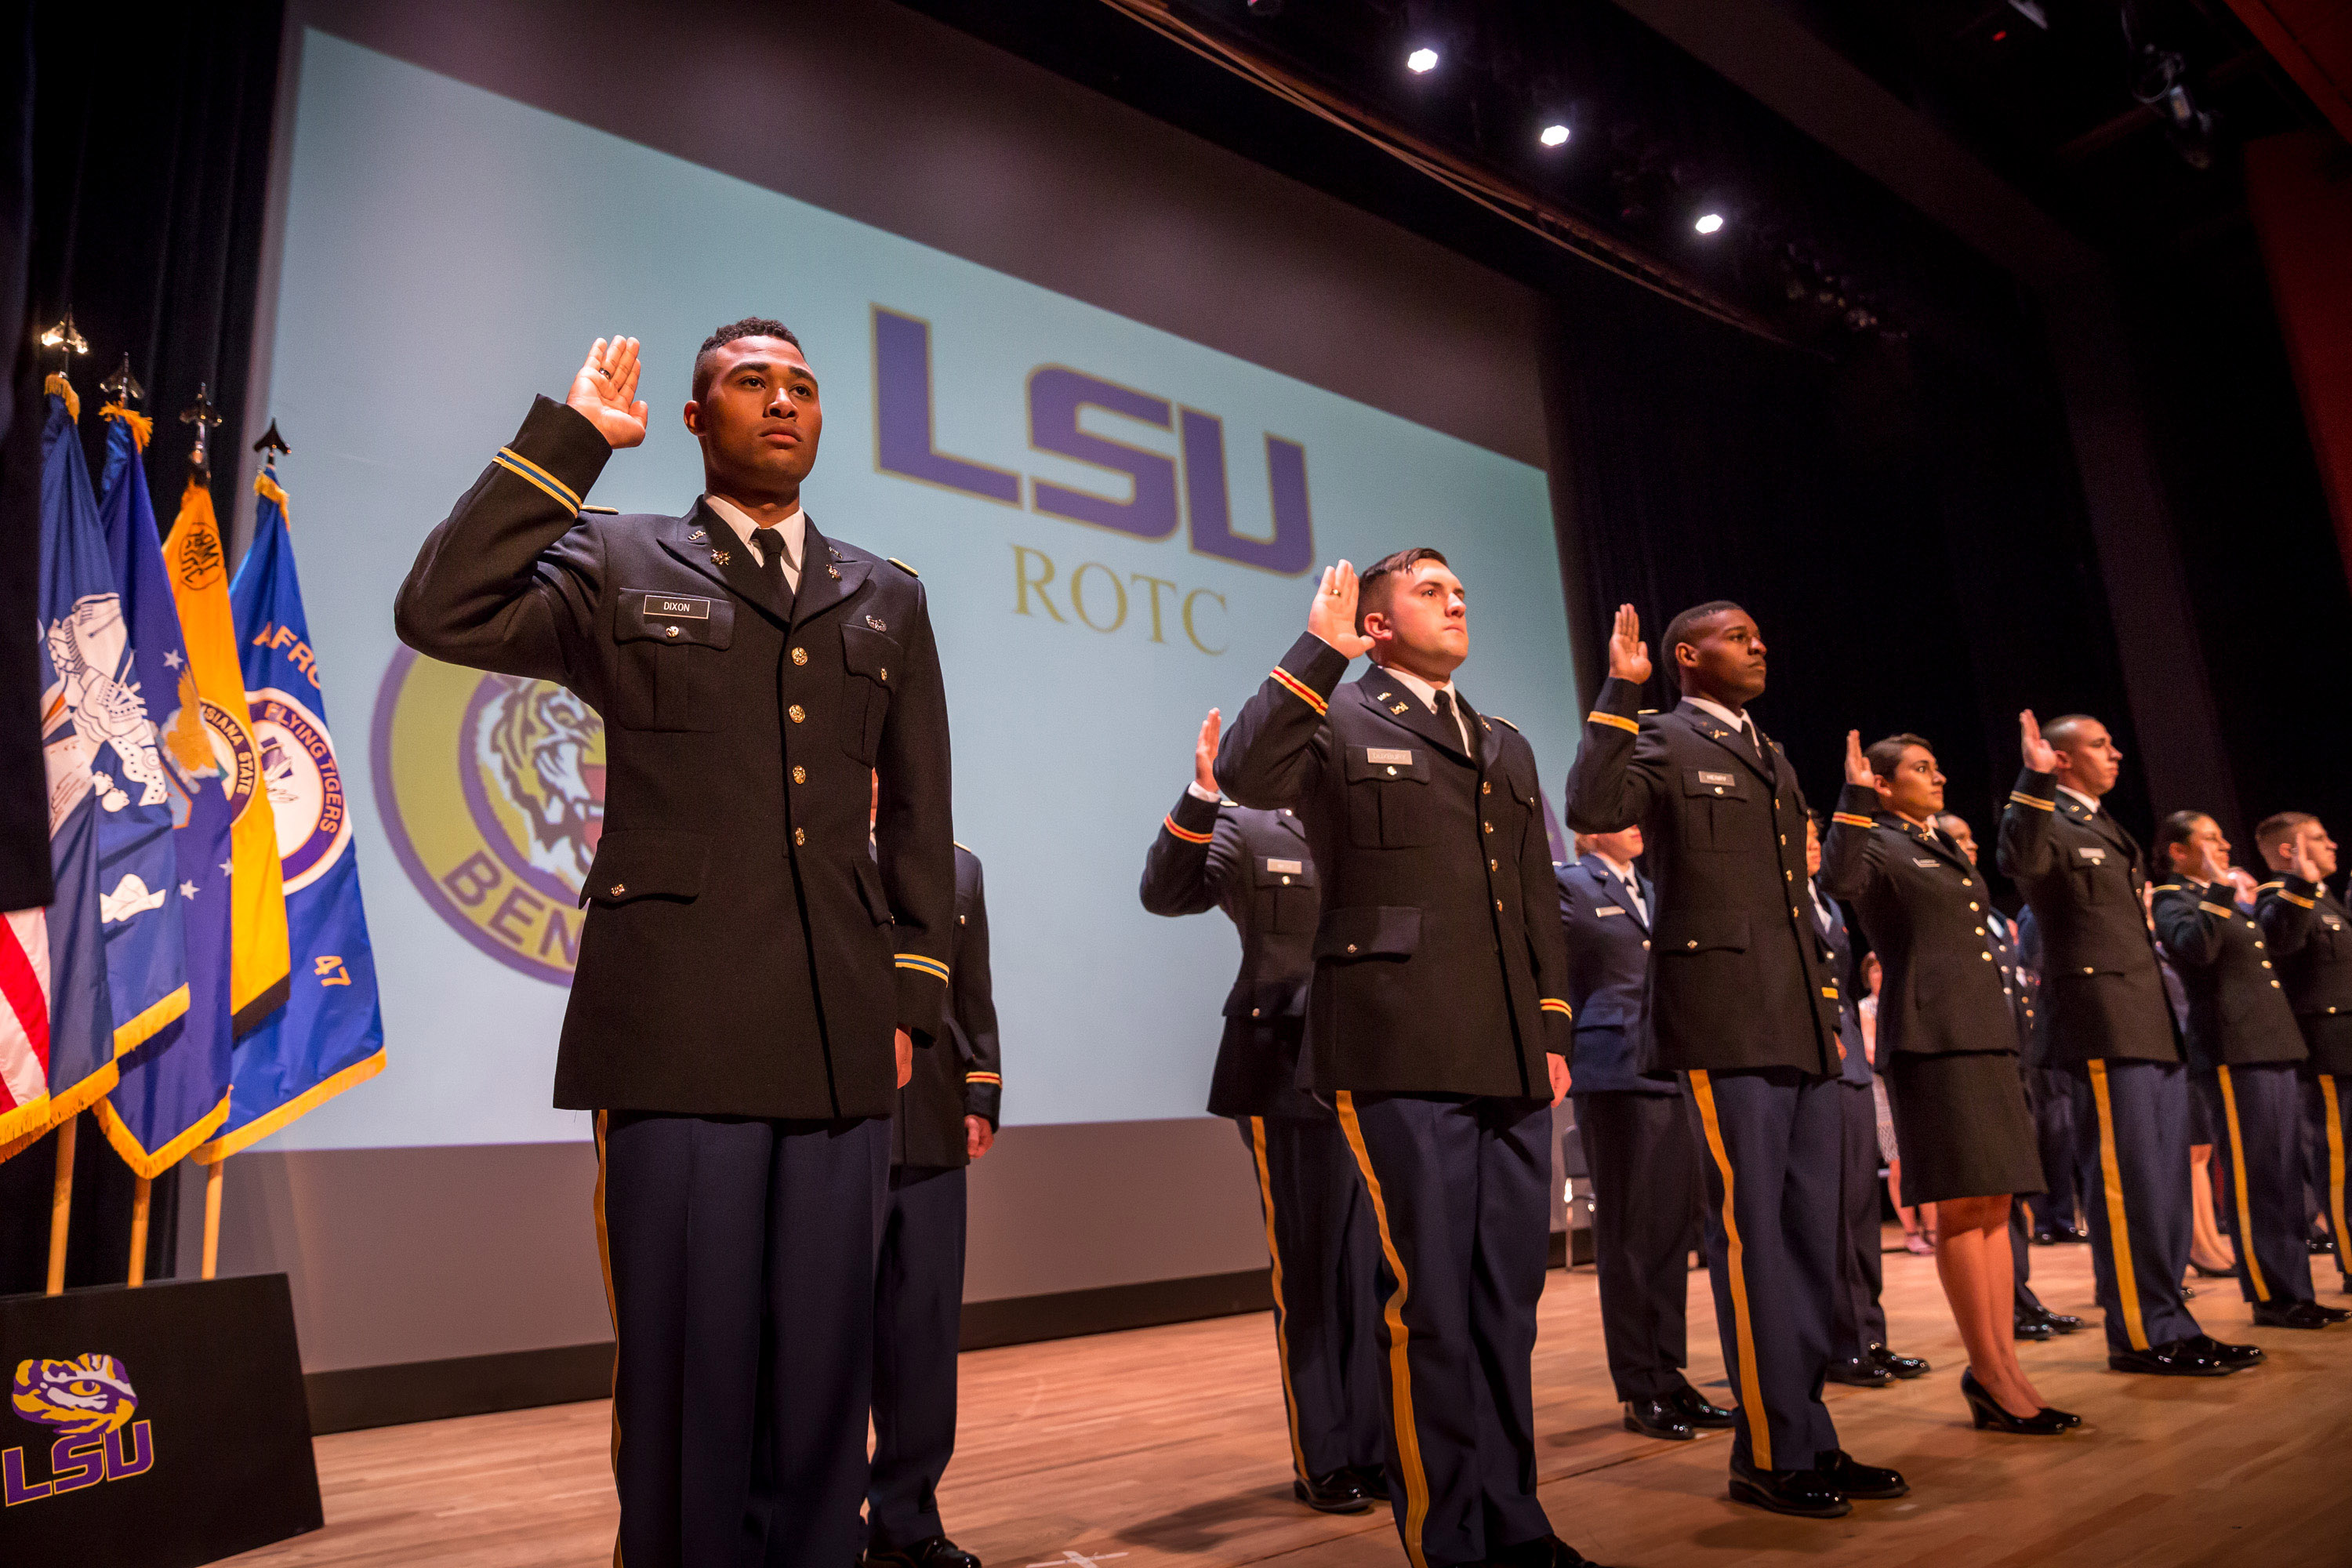 Ceremonies Taking Place Throughout Campus This Week for LSU’s 295th